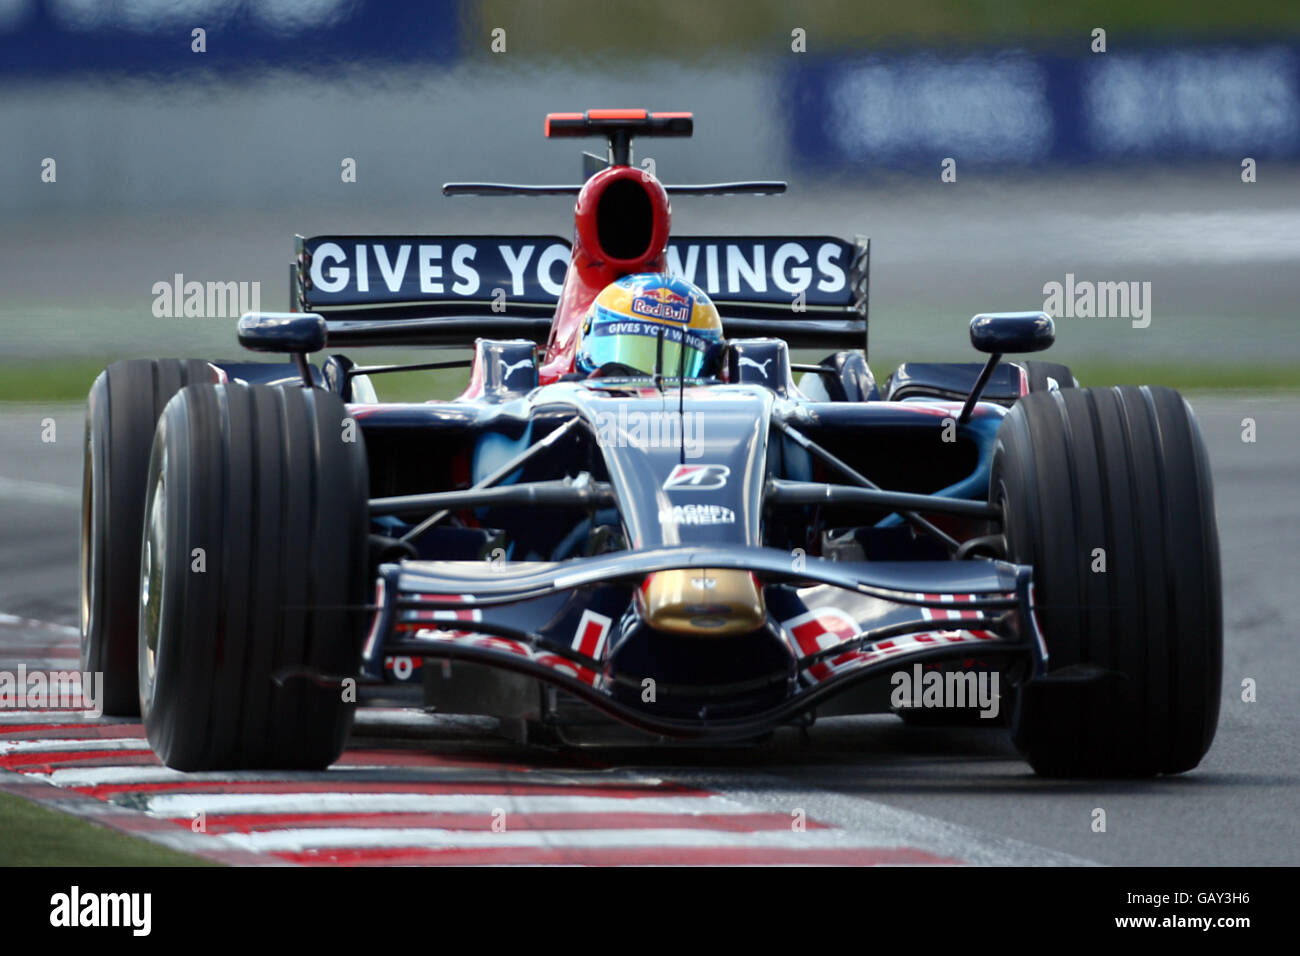 Formula One Motor Racing - French Grand Prix - Qualifying - Magny Cours. Toro Rosso's Sebastien Bourdais during qualifying for the Grand Prix at Magny-Cours, Nevers, France. Stock Photo